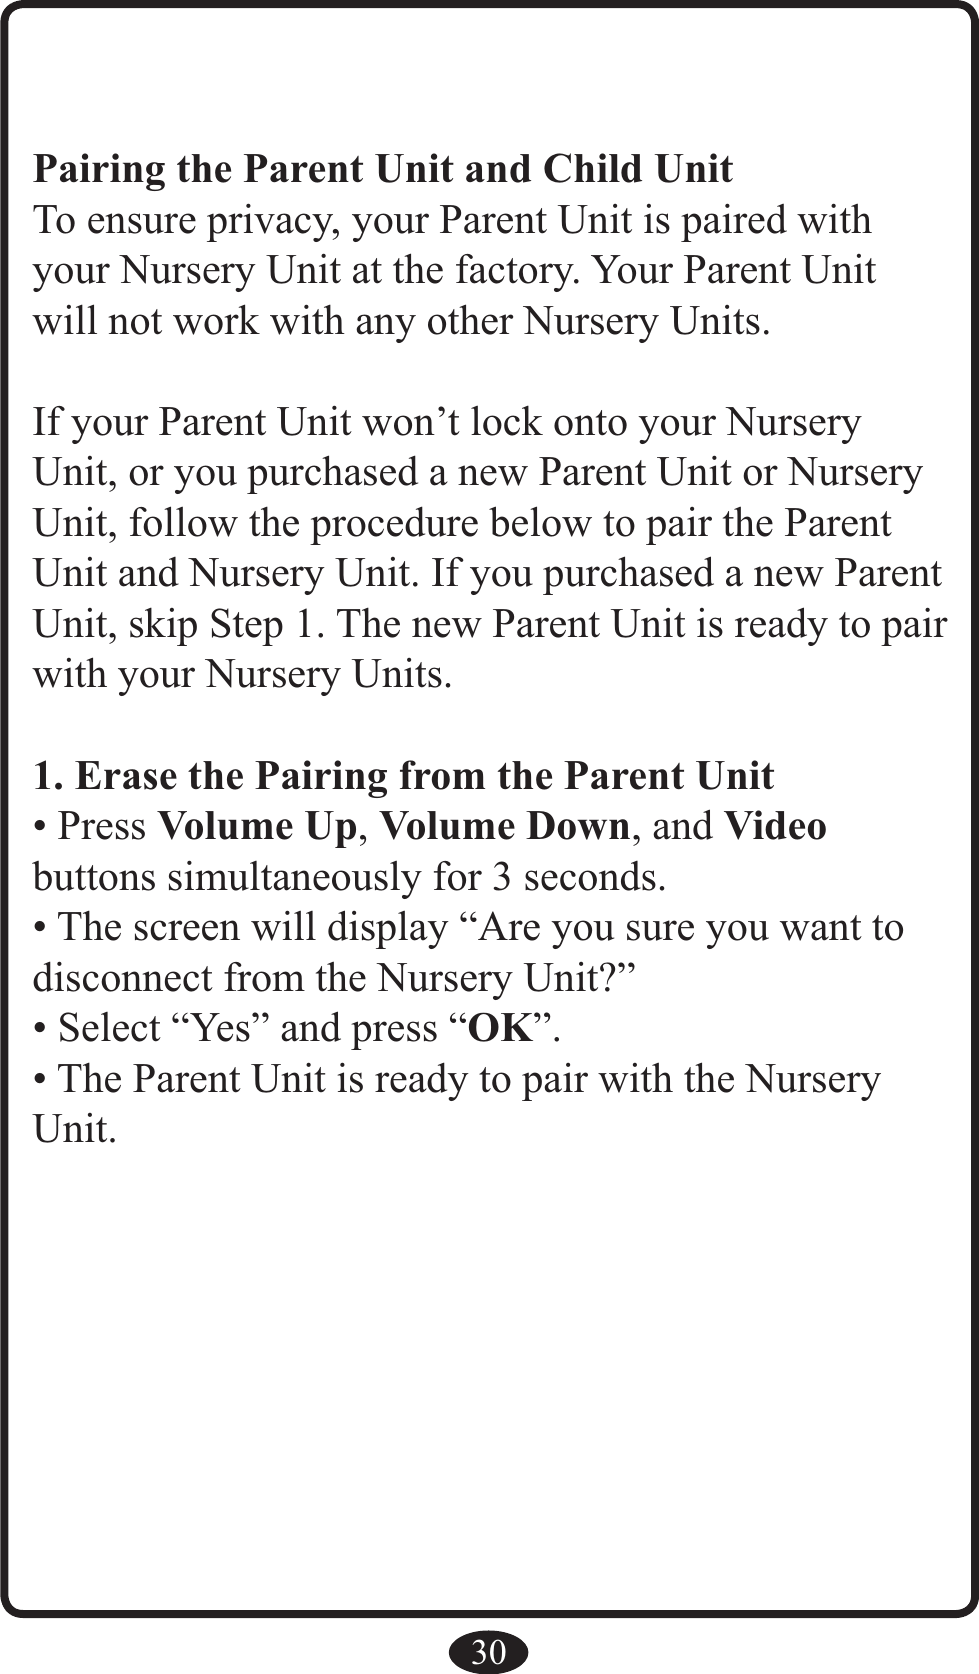 30Pairing the Parent Unit and Child UnitTo ensure privacy, your Parent Unit is paired with your Nursery Unit at the factory. Your Parent Unit will not work with any other Nursery Units.If your Parent Unit won’t lock onto your Nursery Unit, or you purchased a new Parent Unit or Nursery Unit, follow the procedure below to pair the Parent Unit and Nursery Unit. If you purchased a new Parent Unit, skip Step 1. The new Parent Unit is ready to pair with your Nursery Units.1. Erase the Pairing from the Parent Unit• Press Volume Up, Volume Down, and Video  buttons simultaneously for 3 seconds.• The screen will display “Are you sure you want to disconnect from the Nursery Unit?”• Select “Yes” and press “OK”.• The Parent Unit is ready to pair with the Nursery Unit.